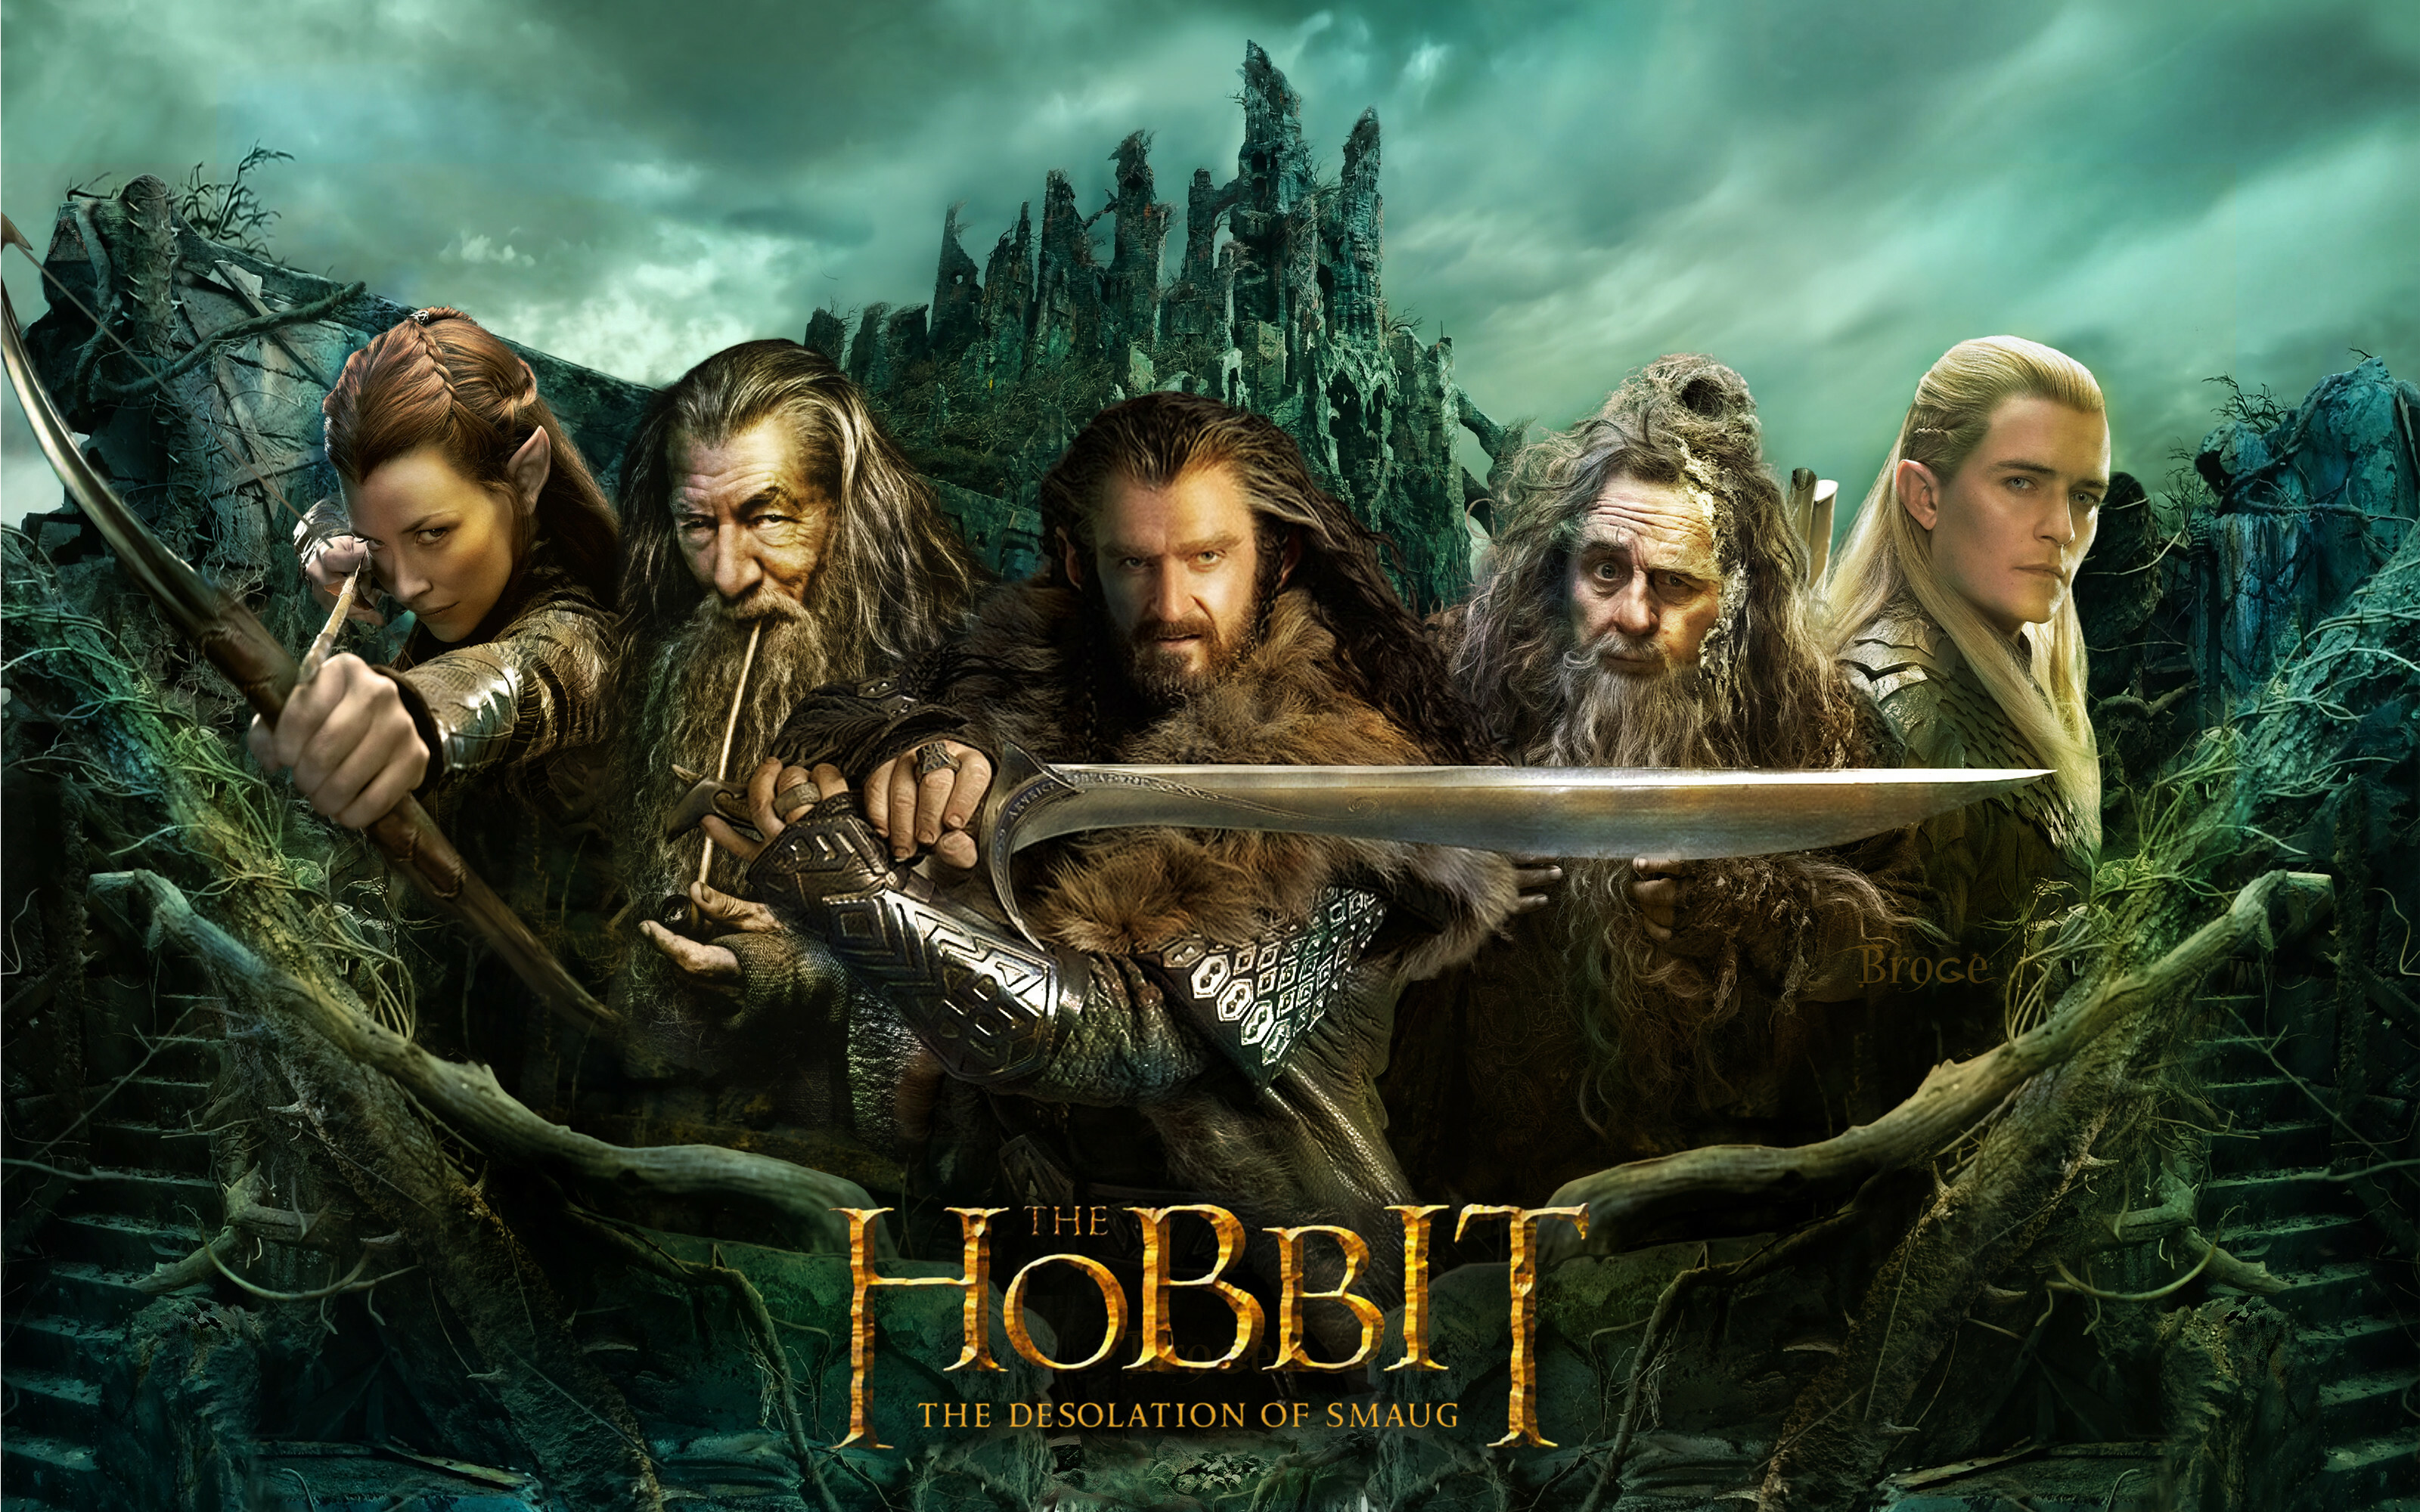 The Hobbit: The Desolation of Smaug, A 2013 epic high fantasy adventure film. 3200x2000 HD Wallpaper.